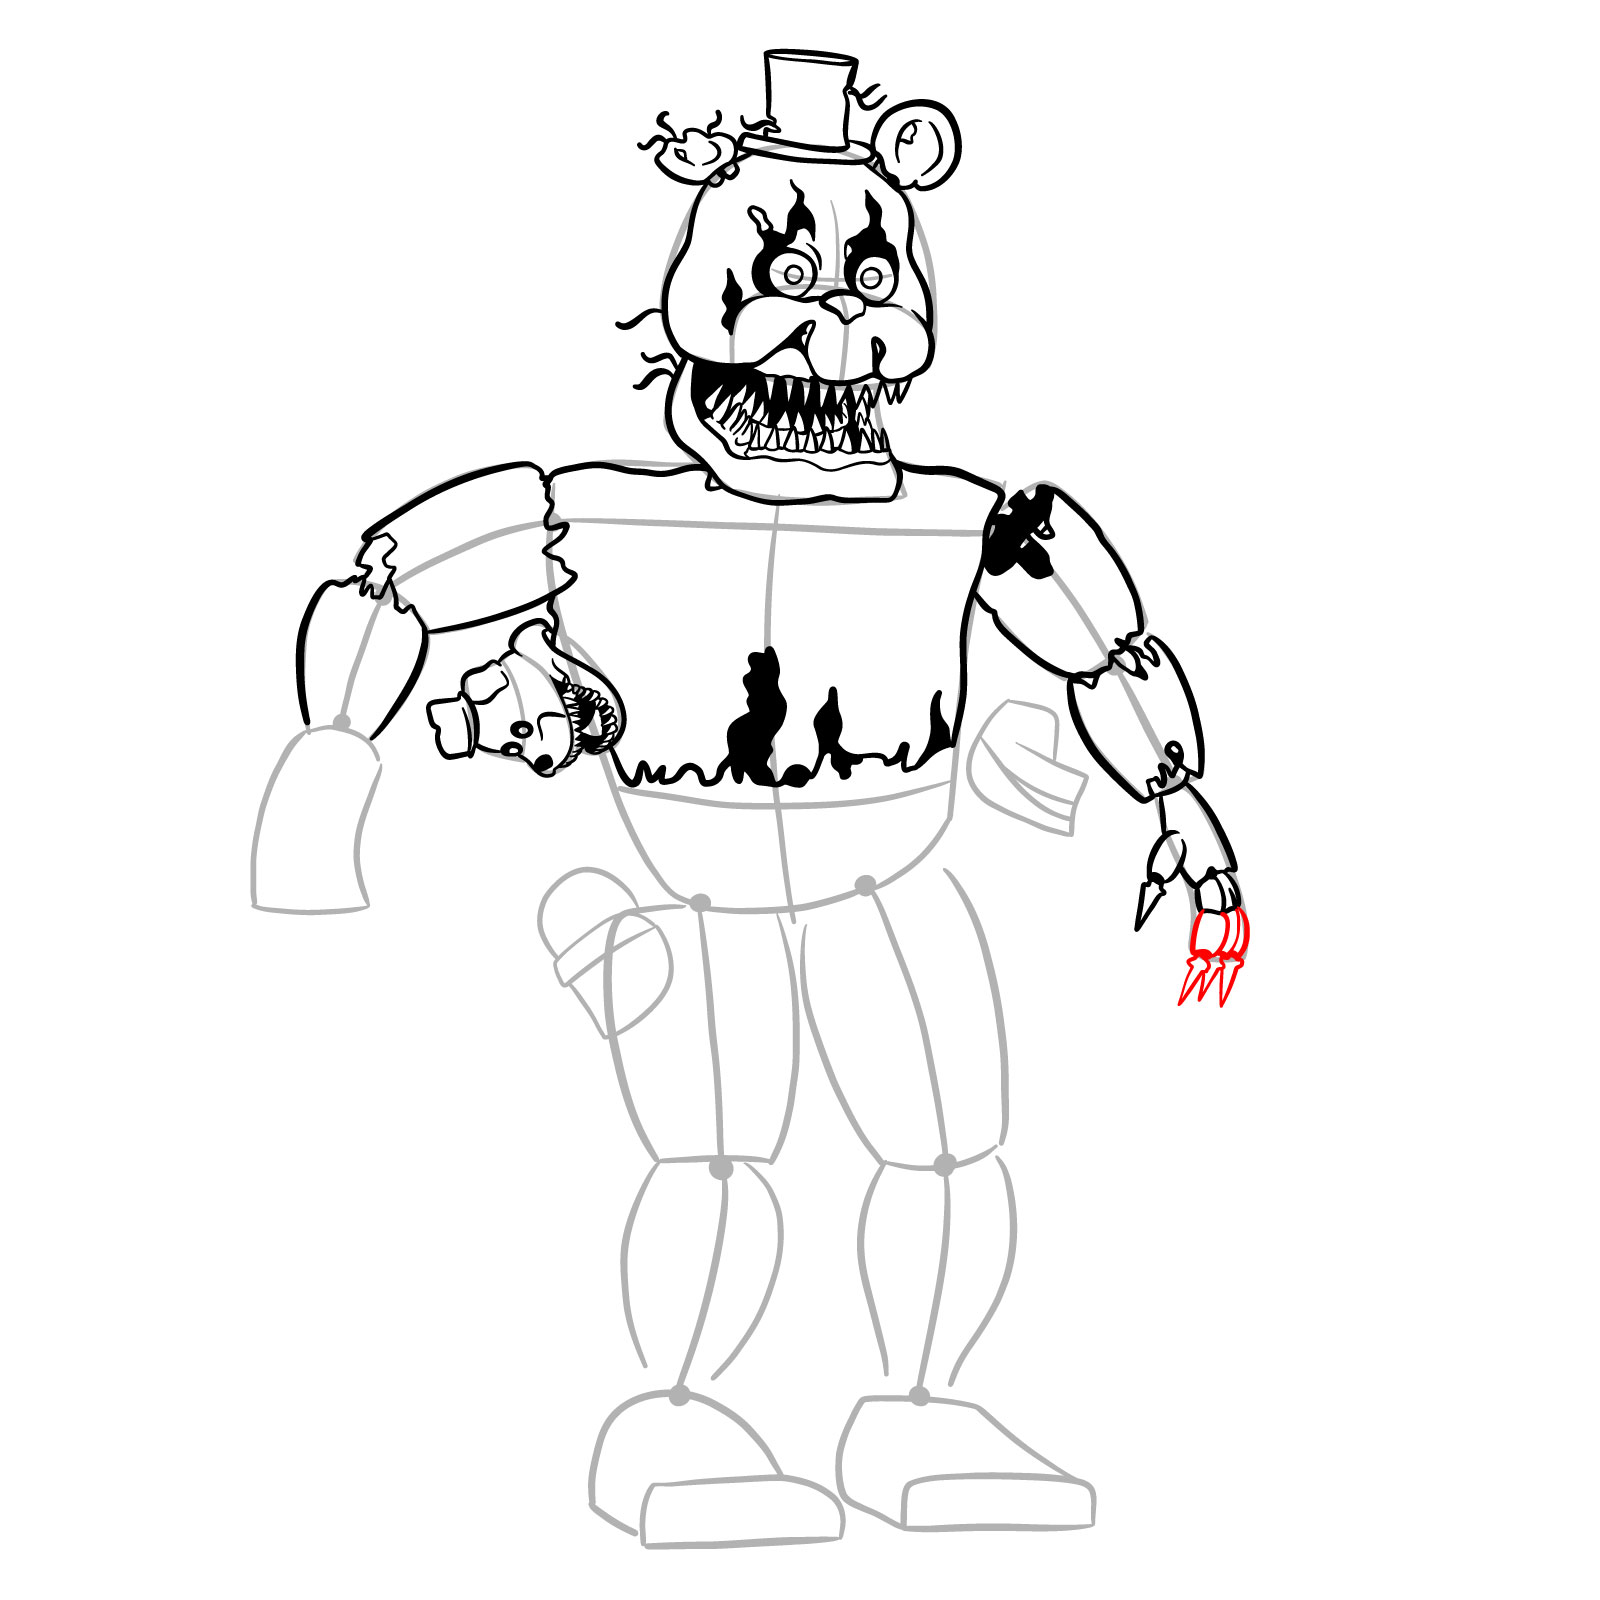 How to draw Nightmare Freddy - step 27